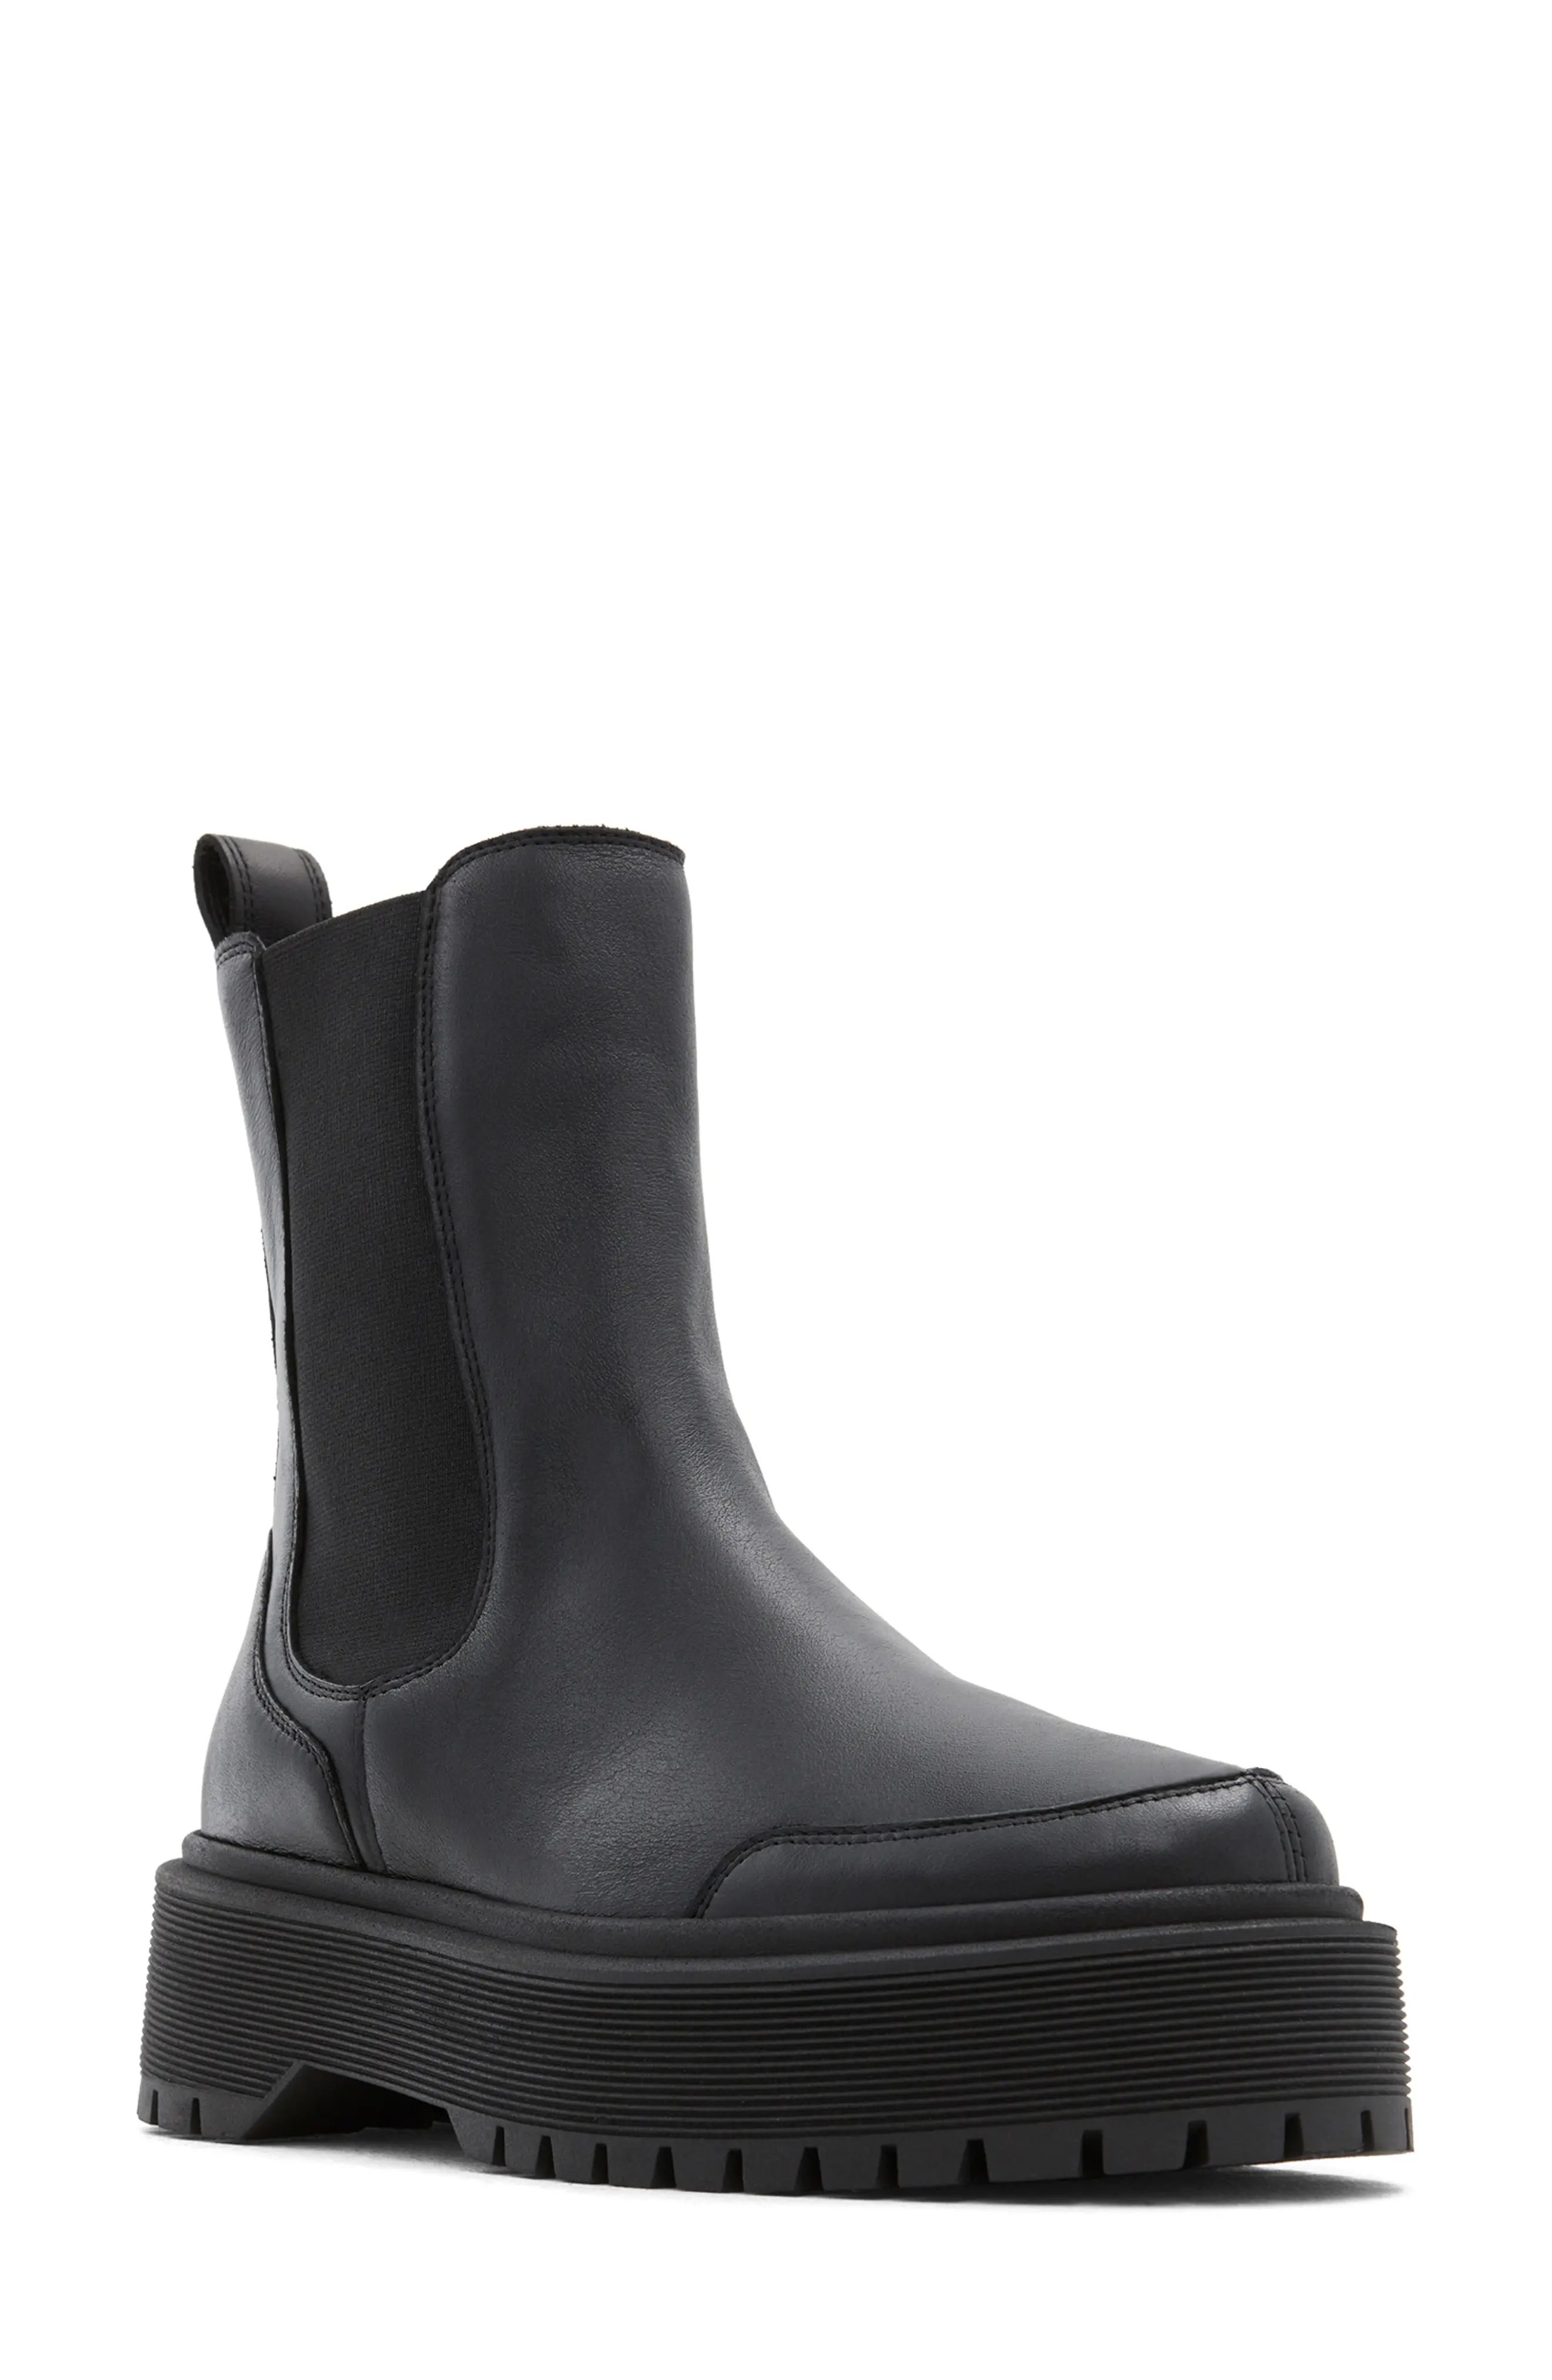 Who What Wear Sowyer Platform Chelsea Boot, Size 6.5 in Black at Nordstrom | Nordstrom